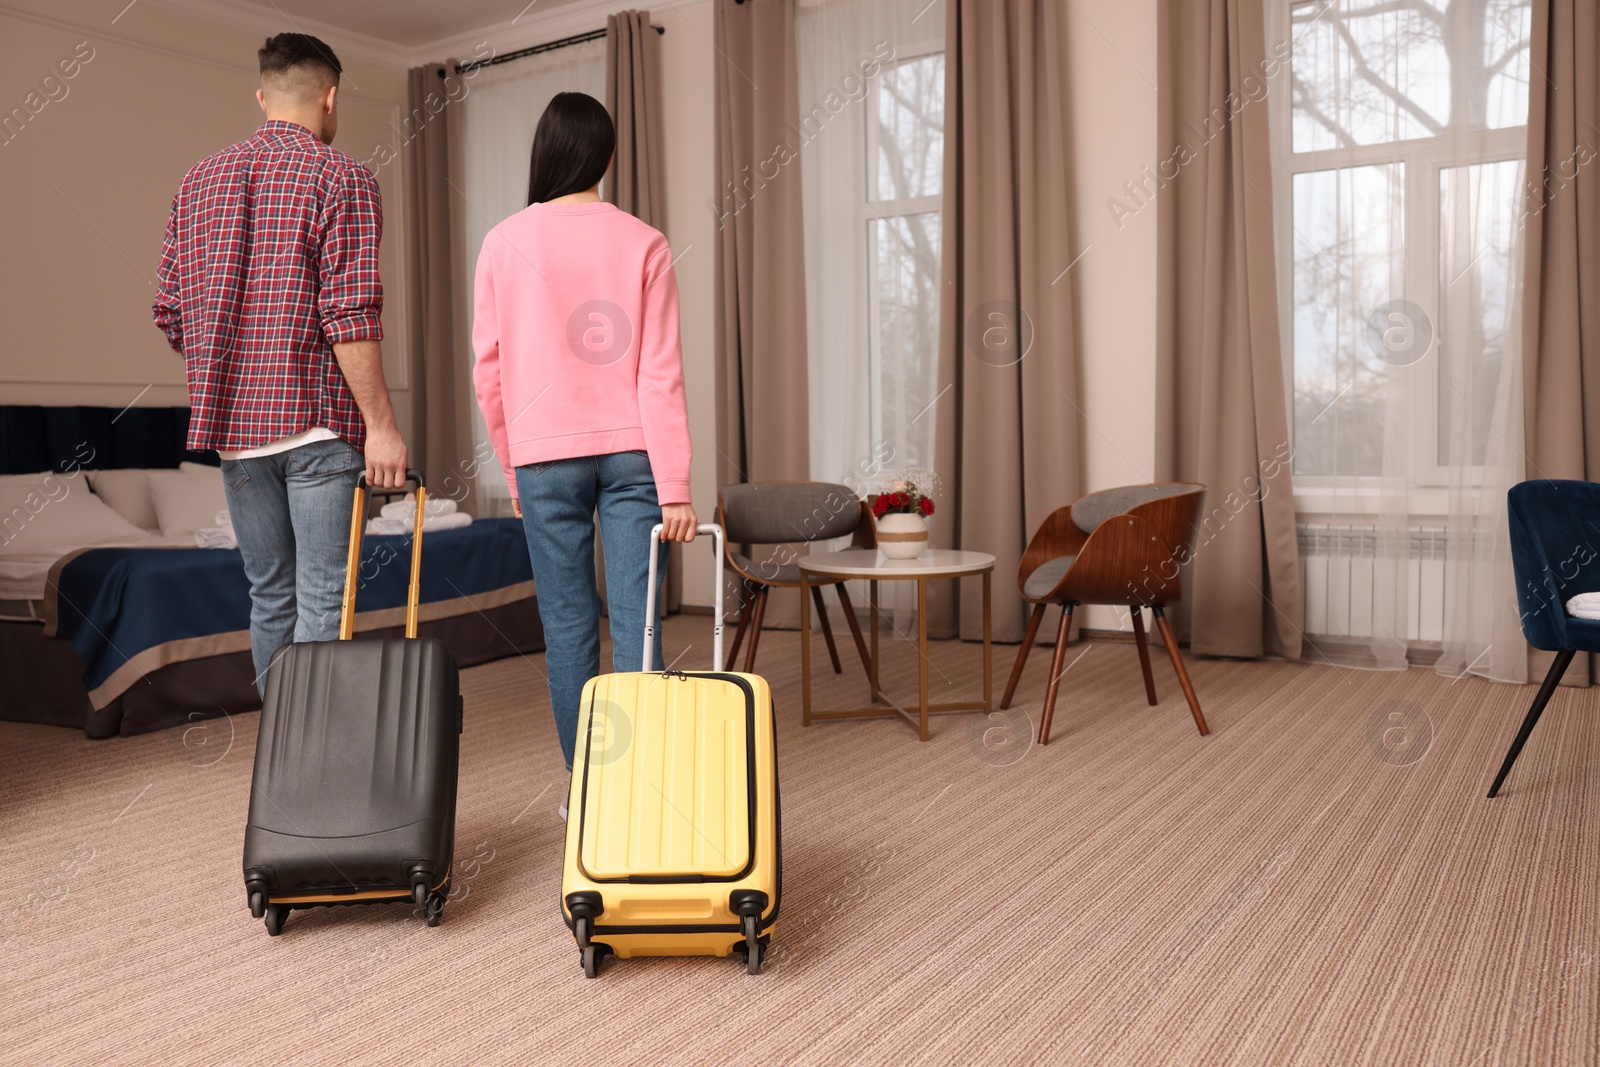 Photo of Couple with suitcases walking into hotel room, back view